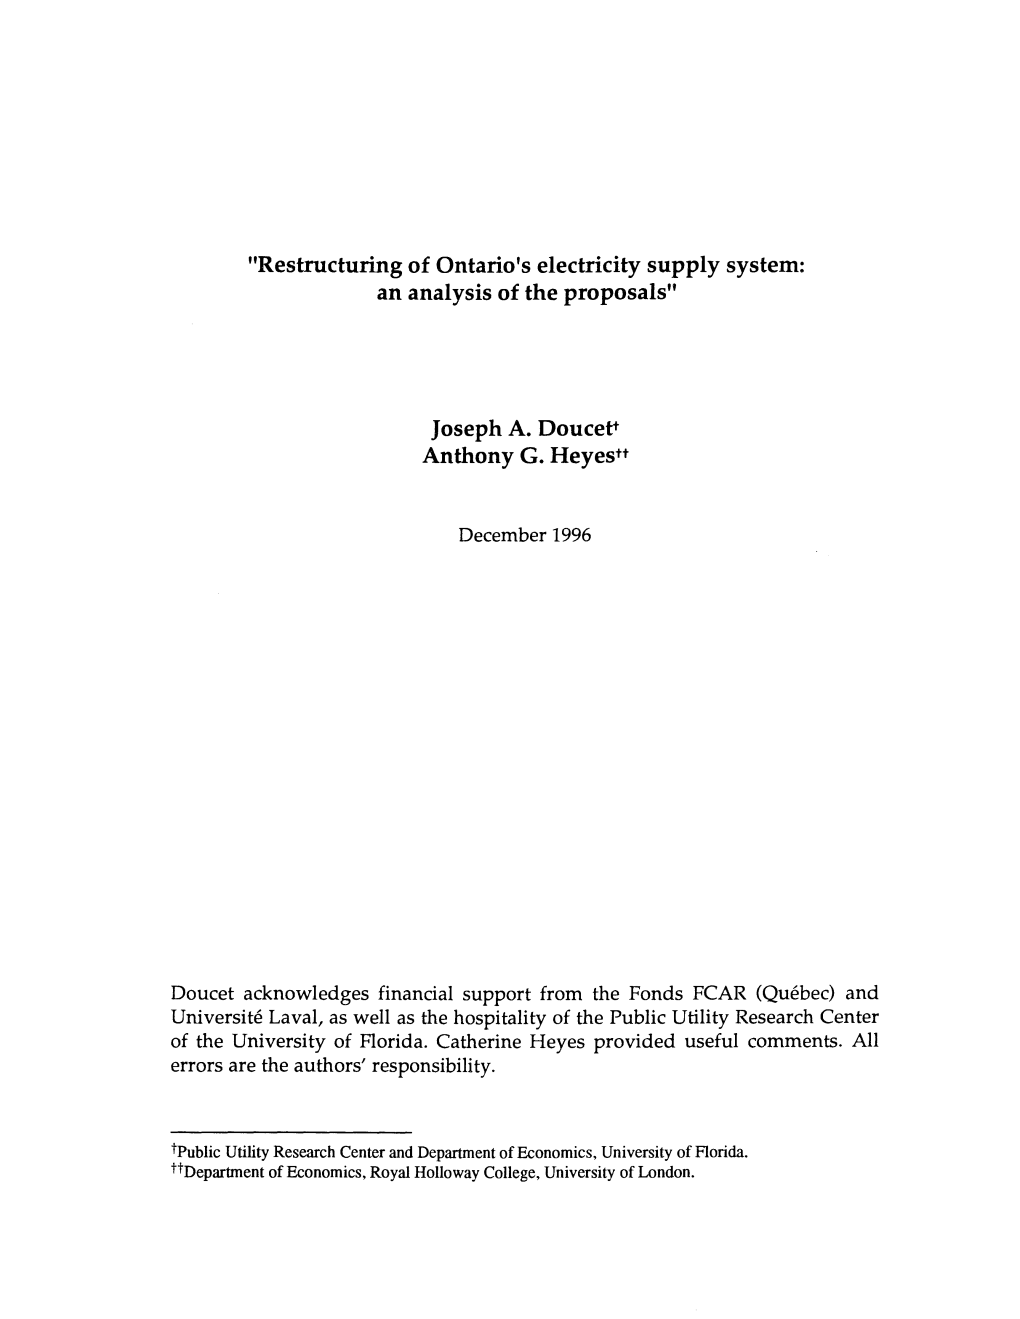 "Restructuring of Ontario's Electricity Supply System: an Analysis of the Proposals"